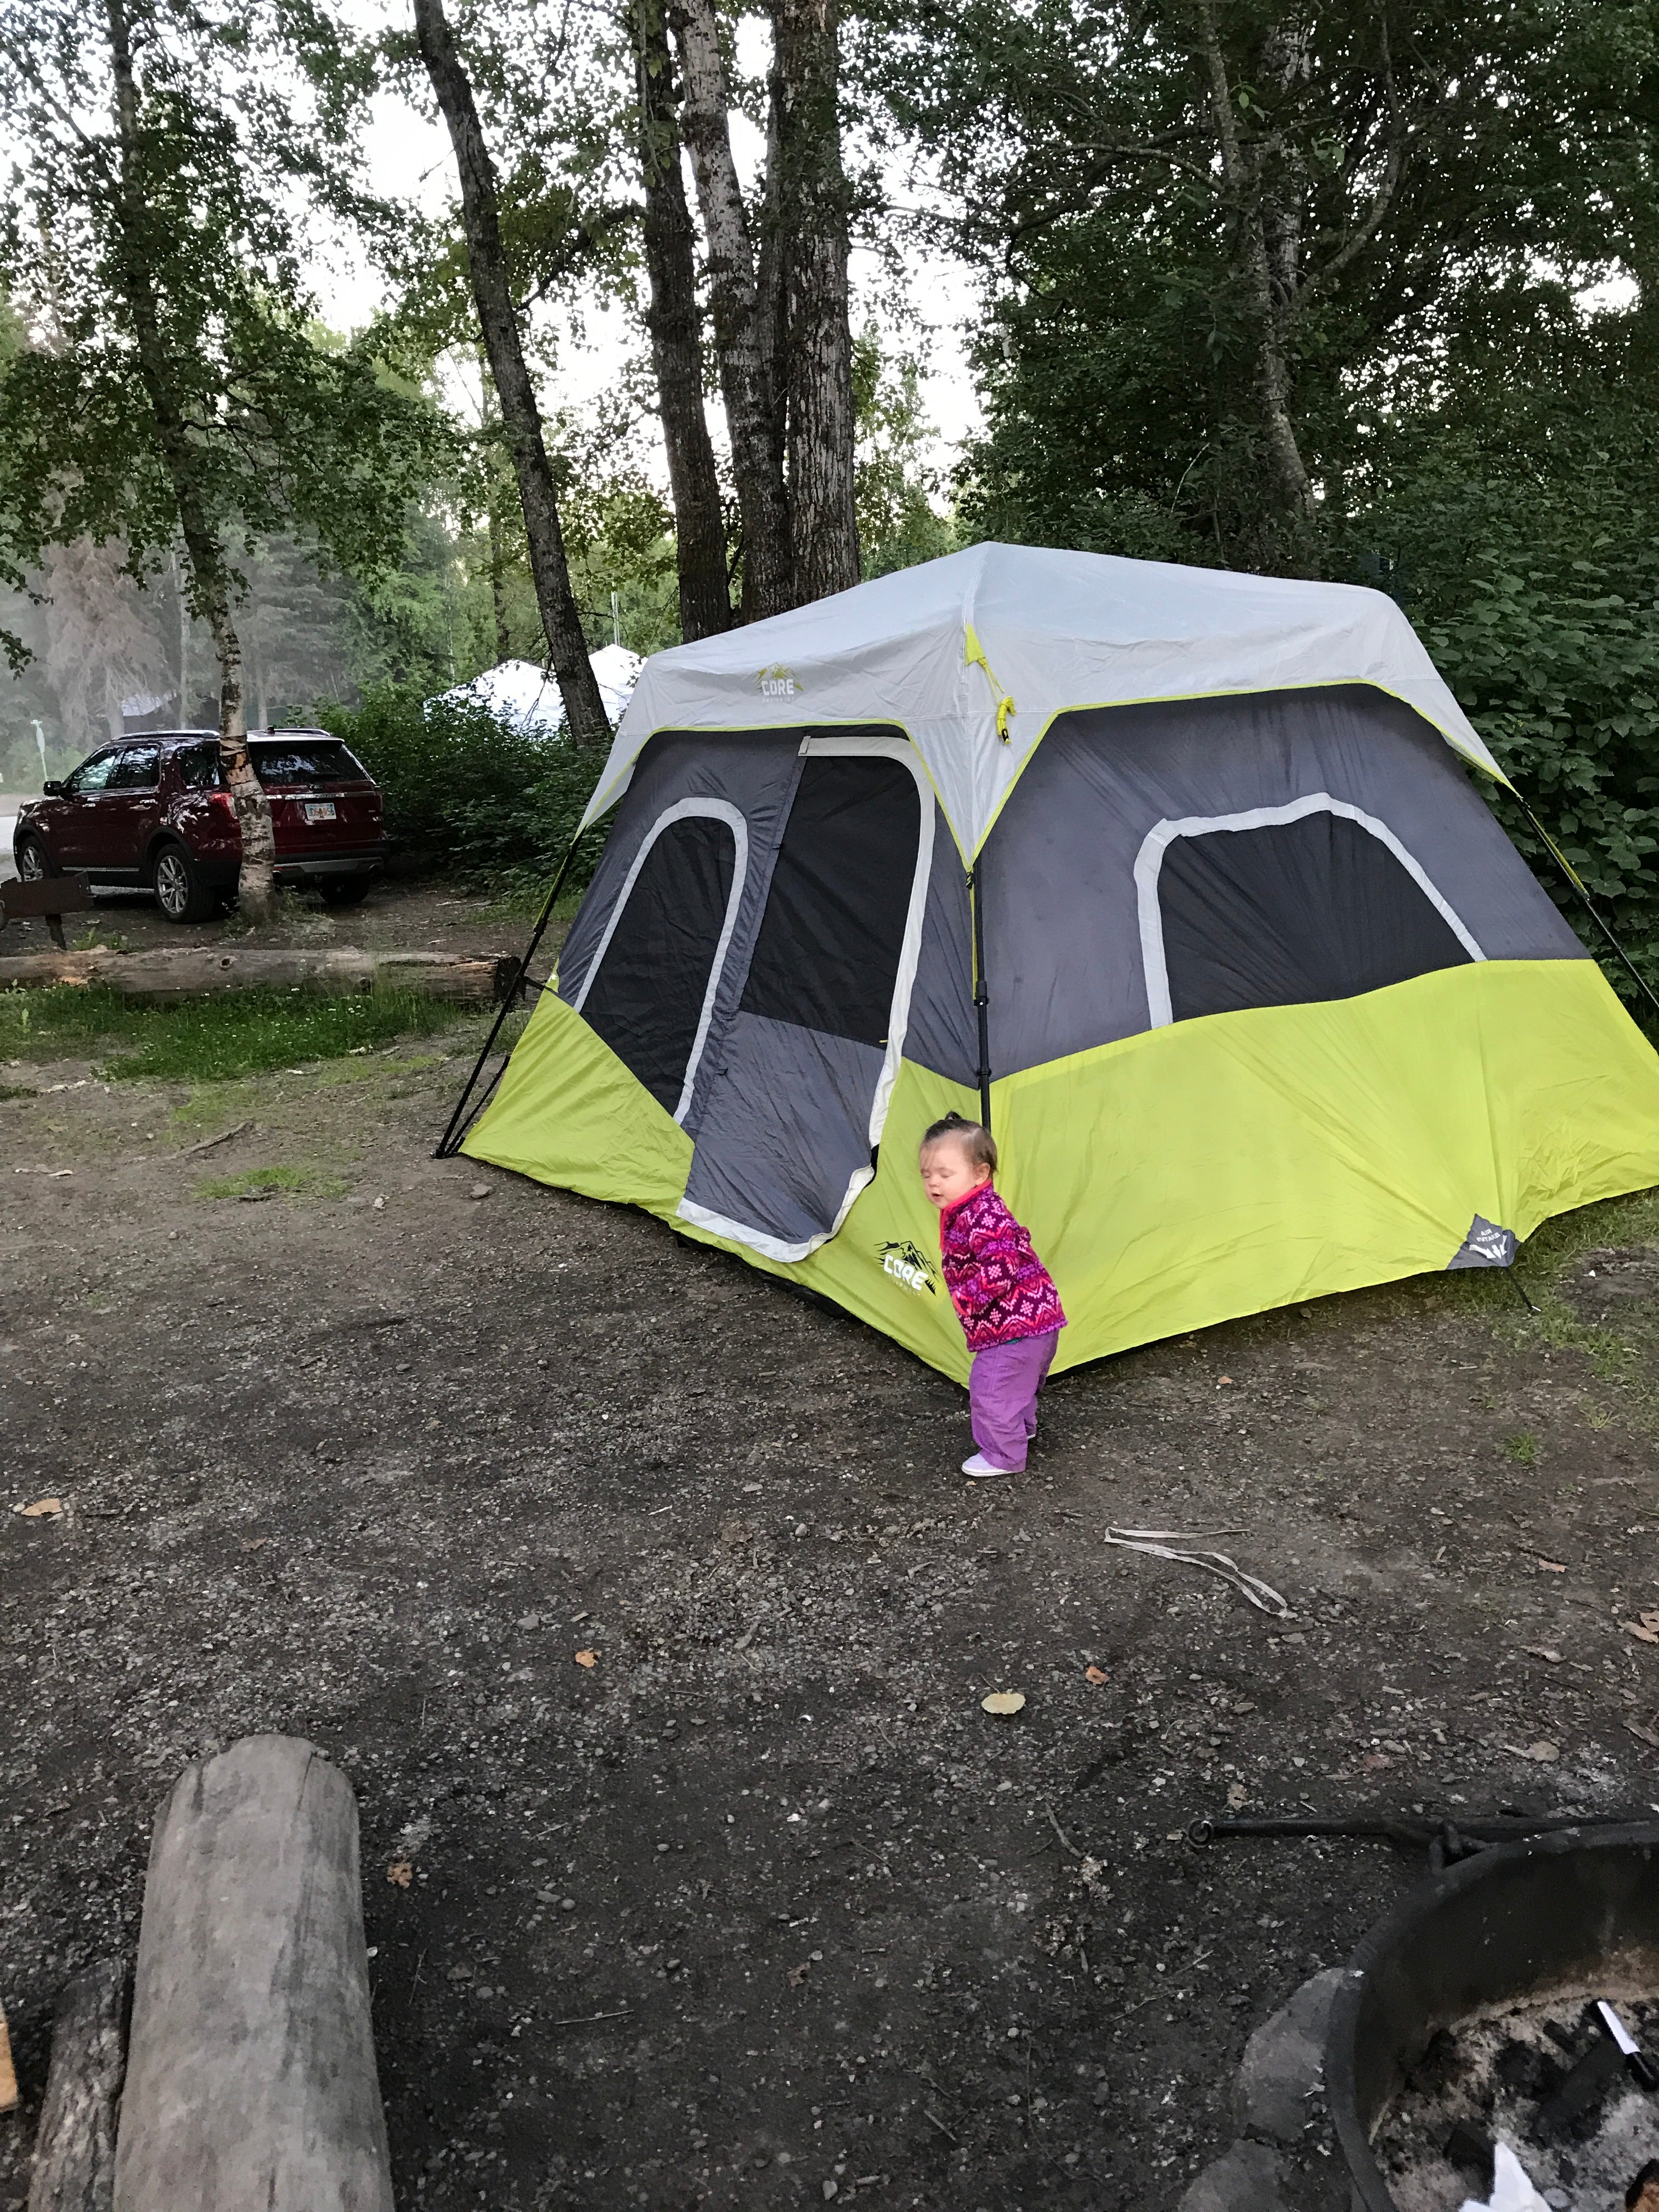 Large tent fits 